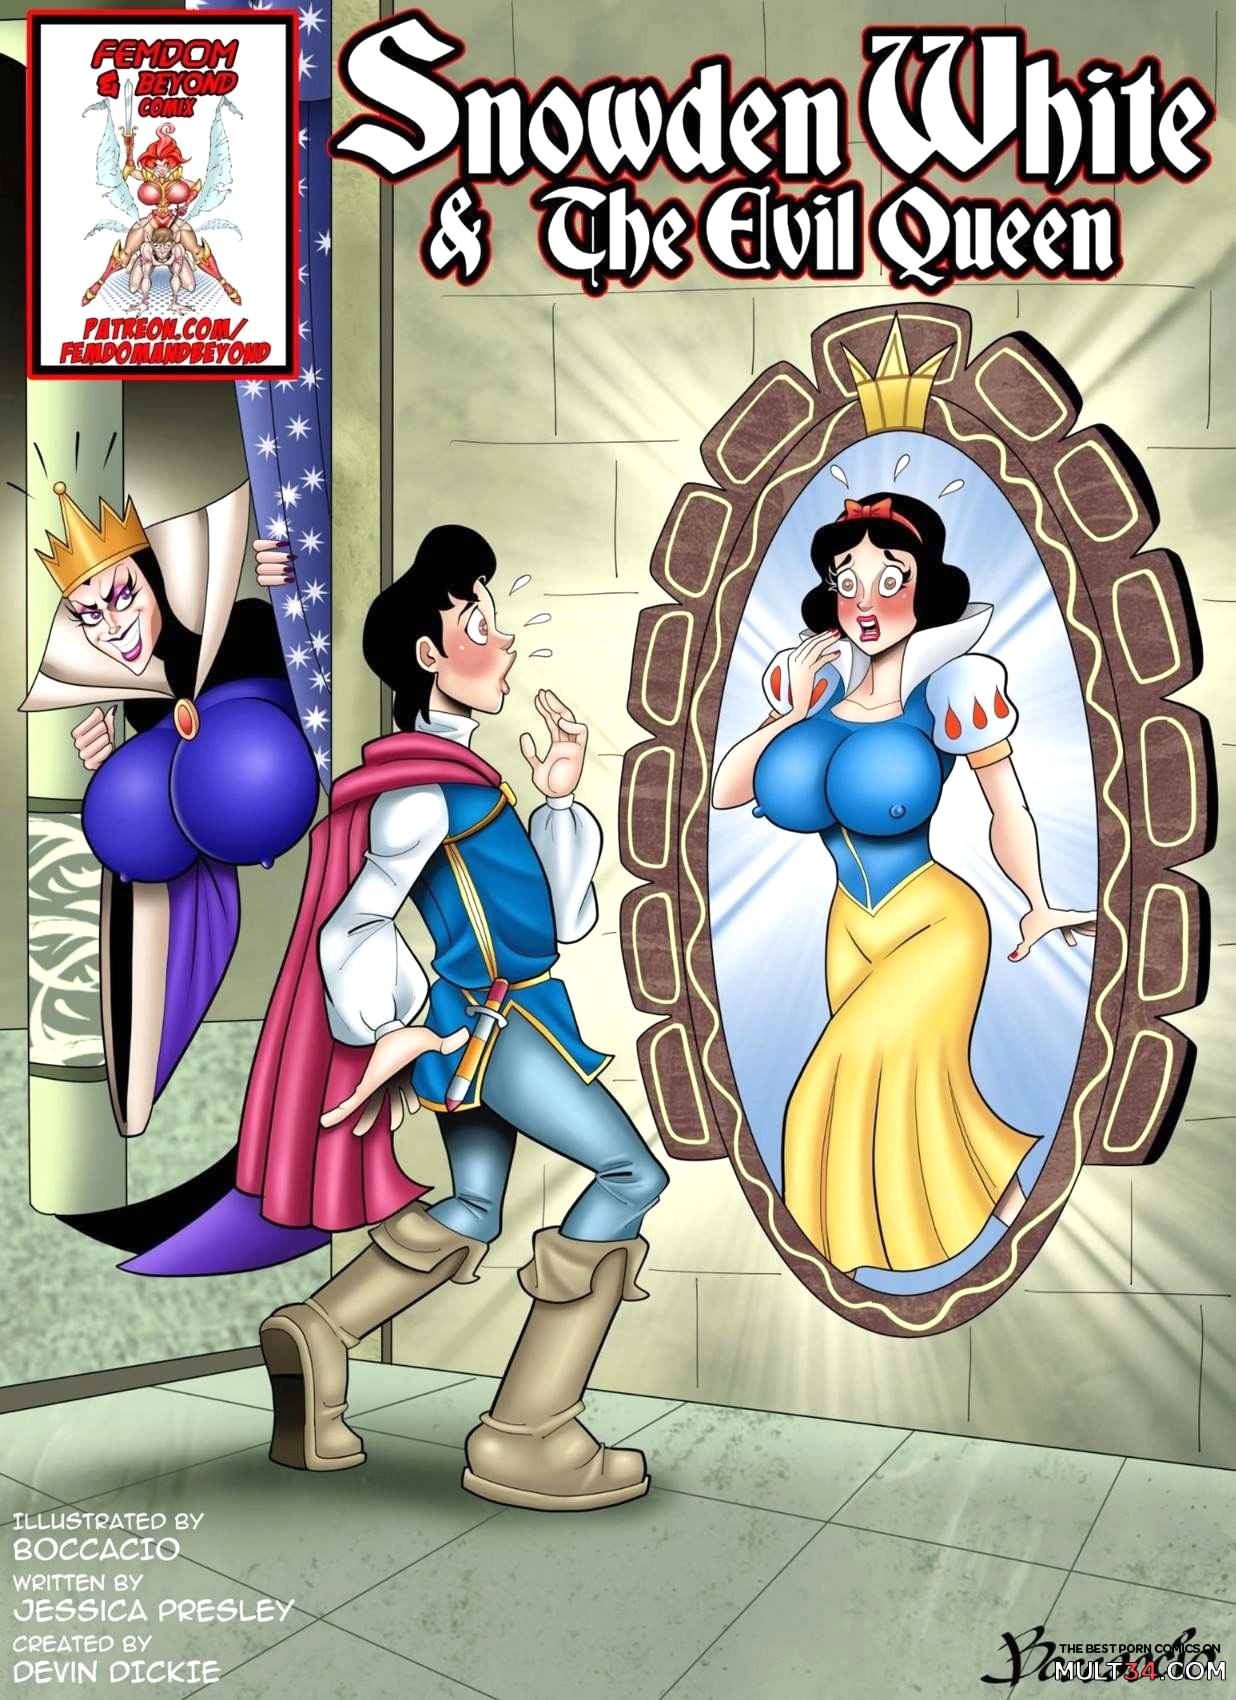 Best Evil - Snowden White And The Evil Queen porn comic - the best cartoon porn comics,  Rule 34 | MULT34